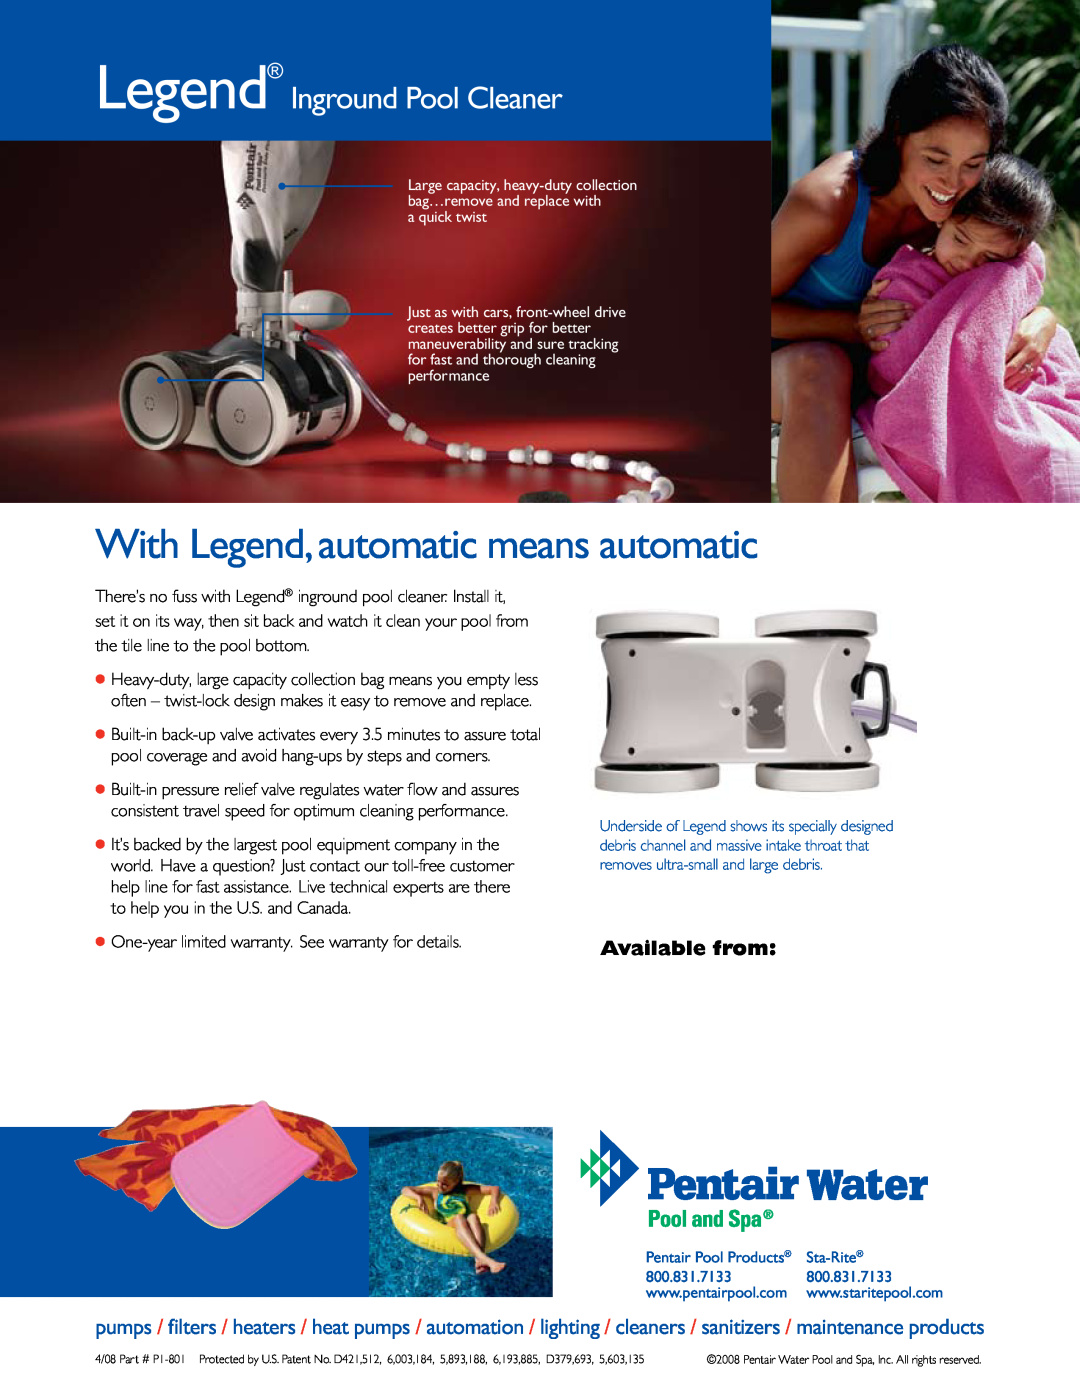 Pentair P1-801 manual Legend Inground Pool Cleaner, With Legend, automatic means automatic, Available from 